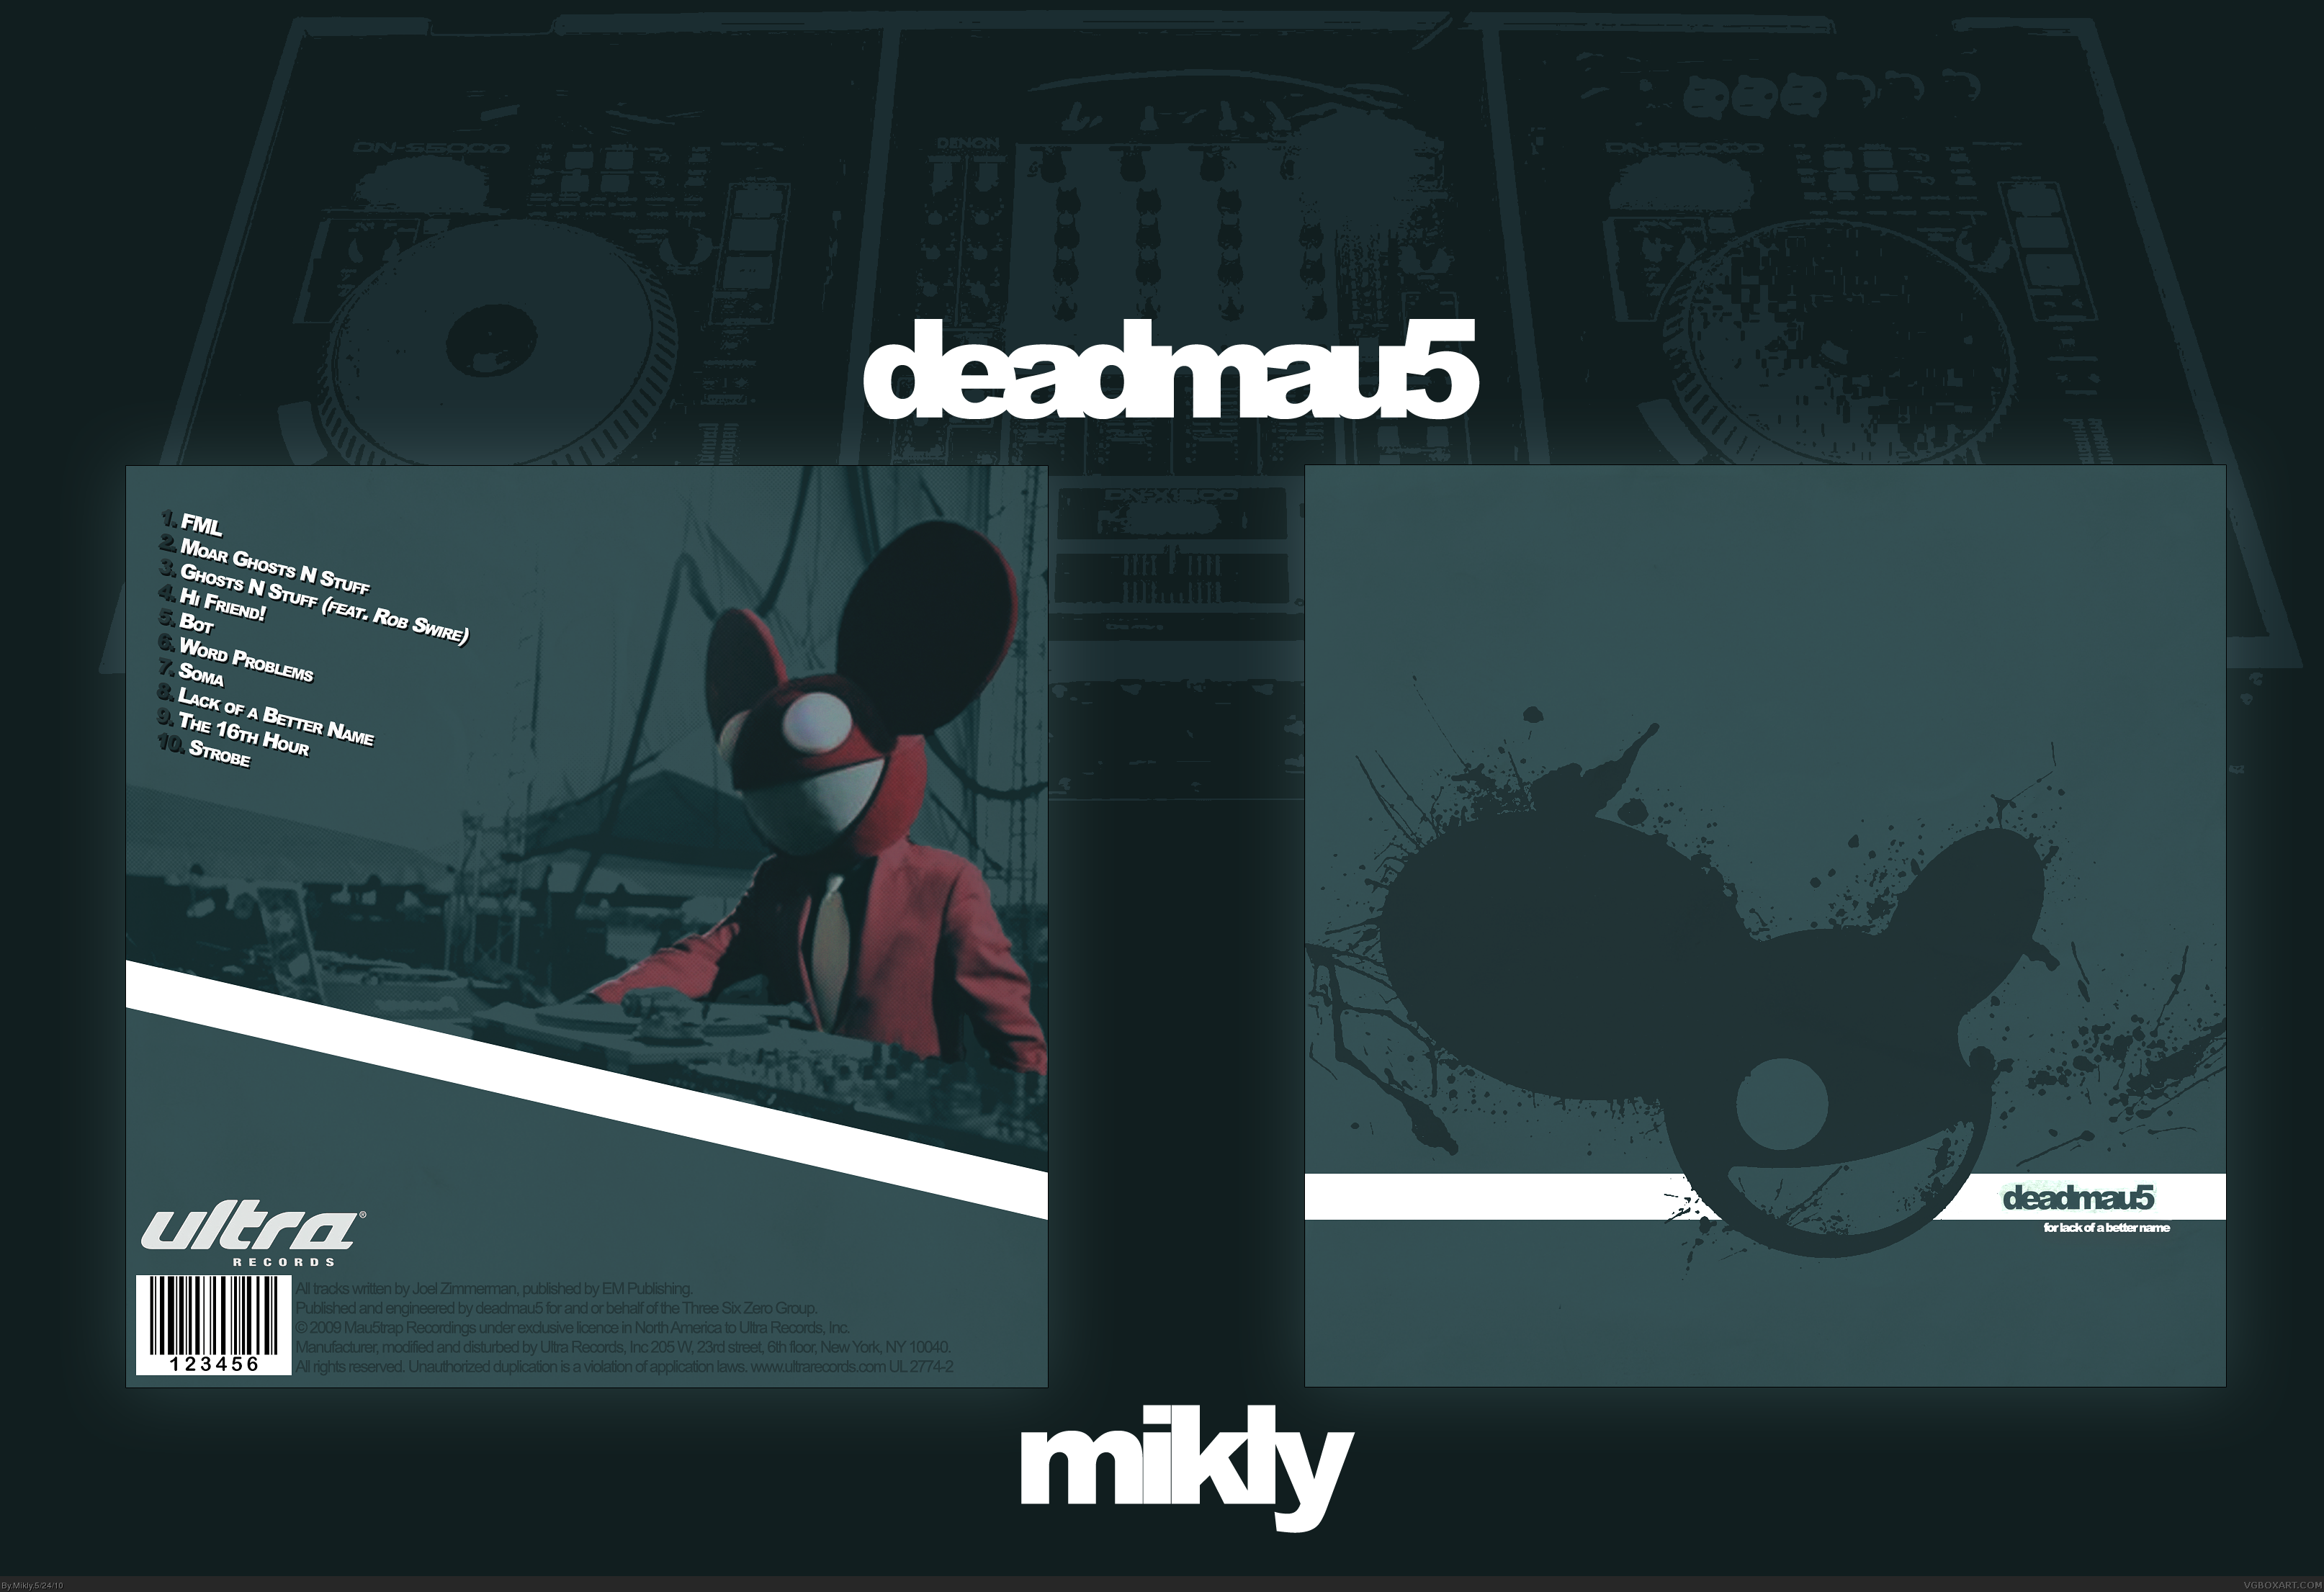 Deadmau5 - For lack of a better name box cover